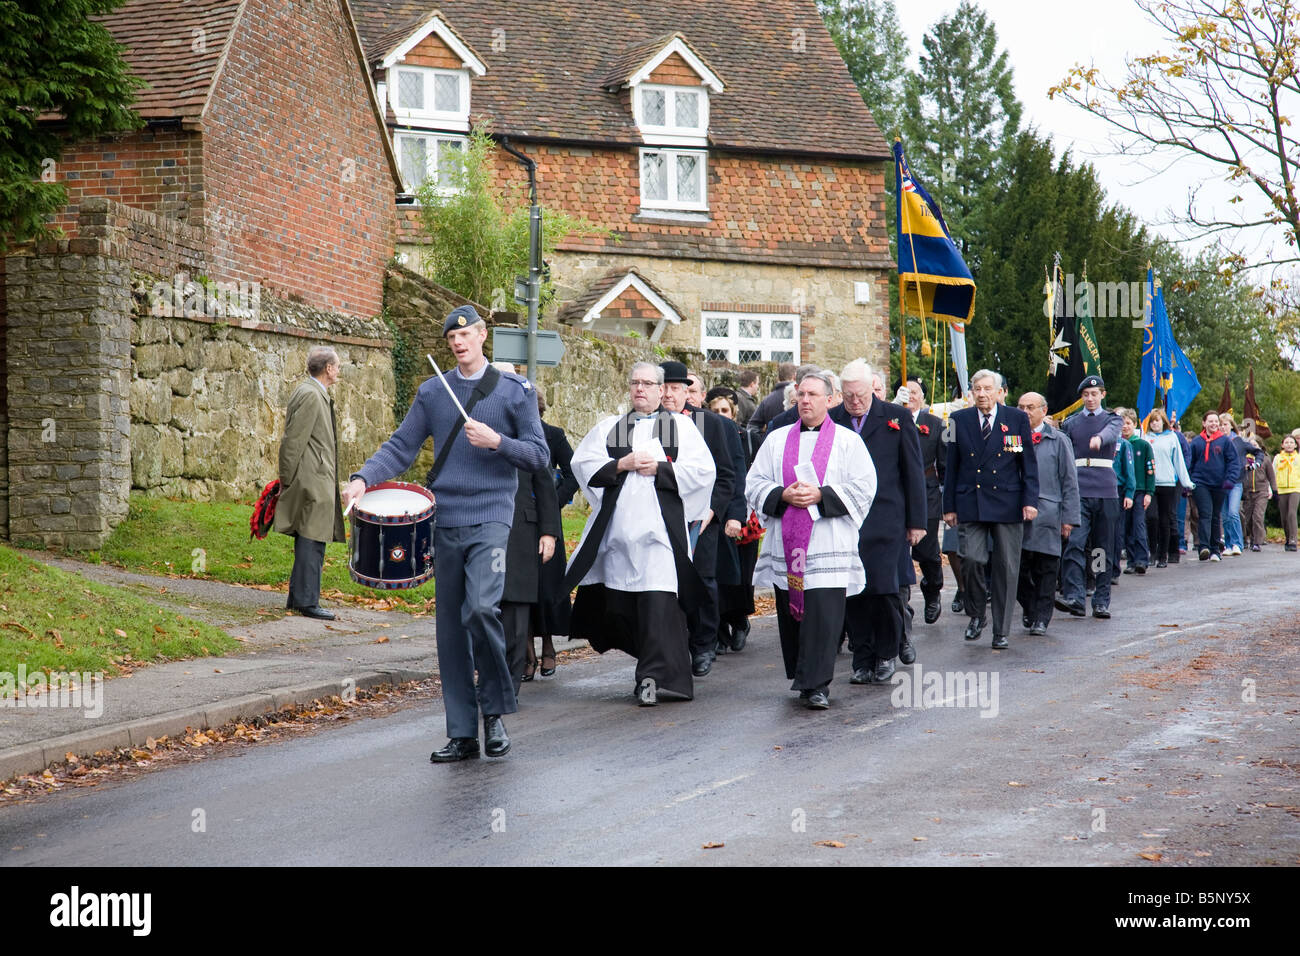 A Remembrance Day procession en route from the church to the War Memorial in Haslemere town centre, Haslemere, England. Stock Photo